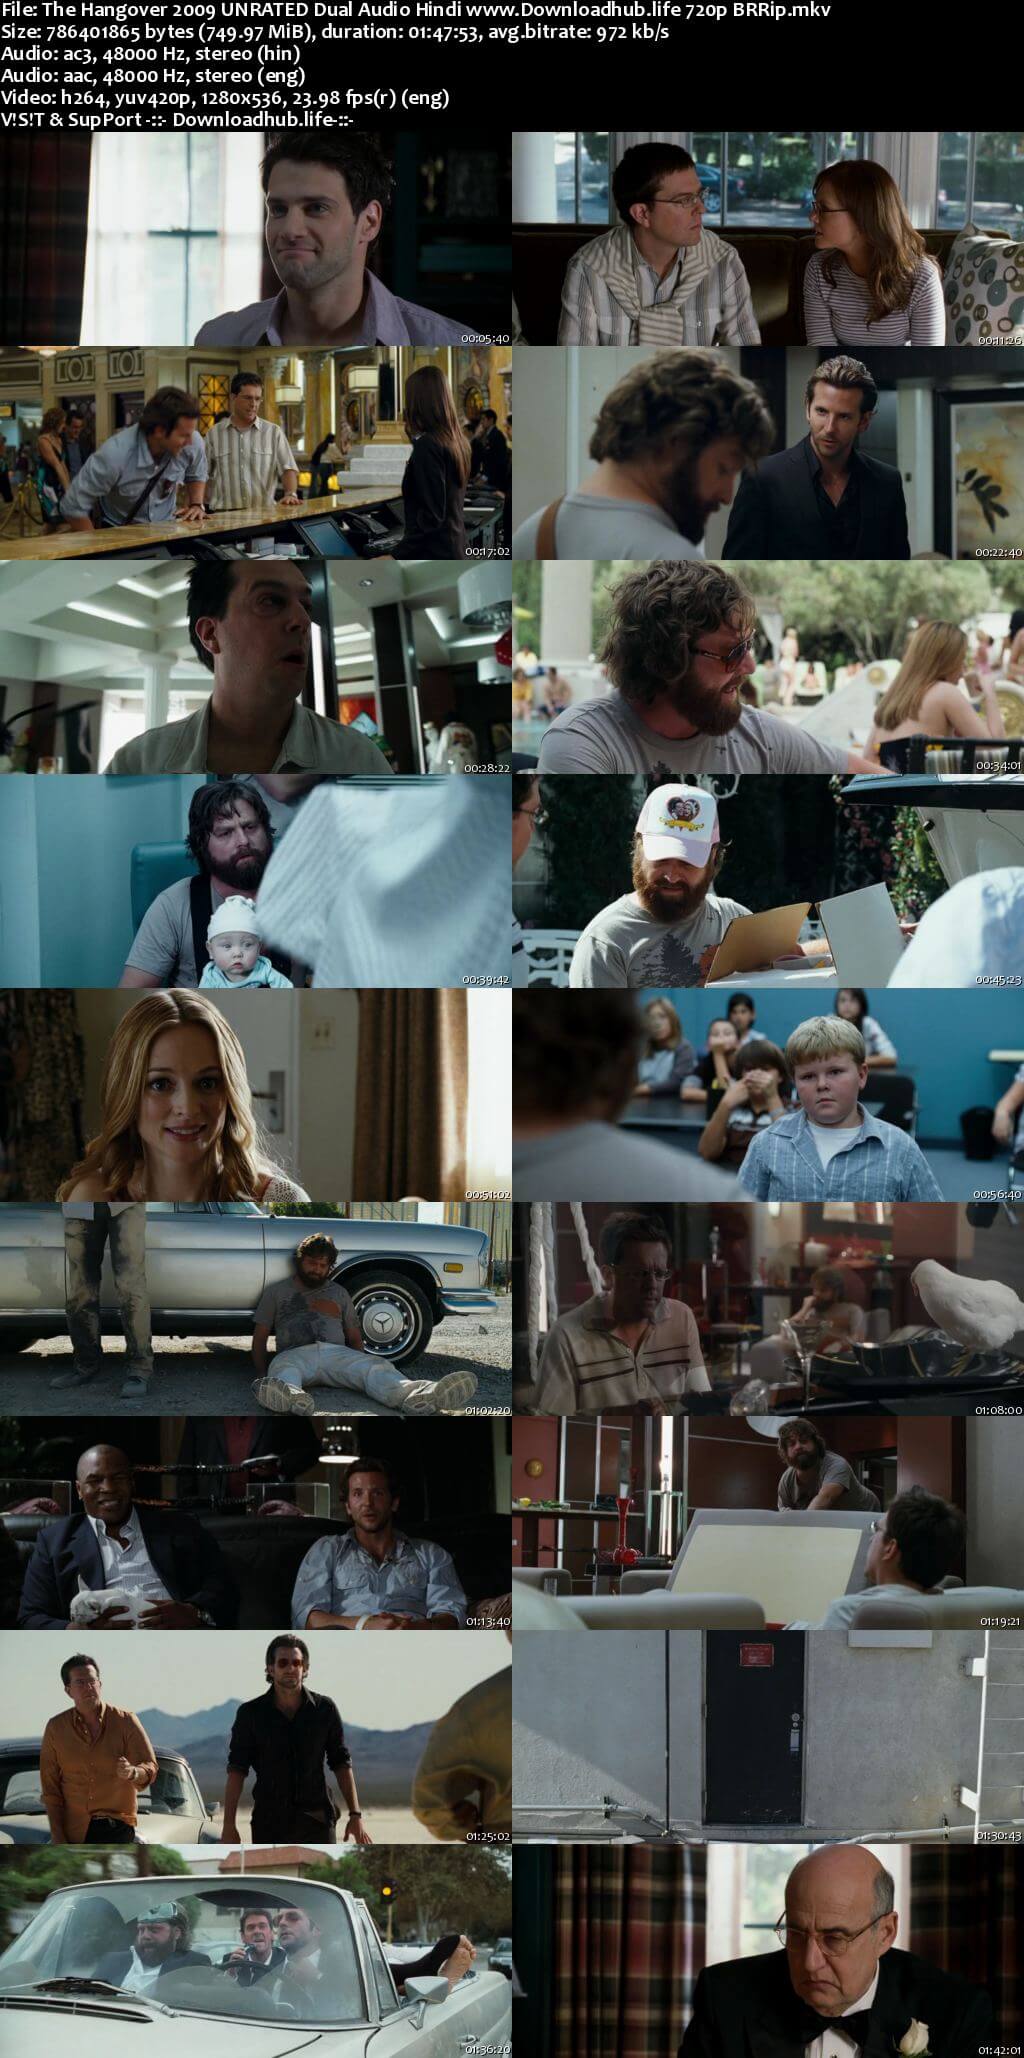 The Hangover 2009 Hindi Dual Audio 720p UNRATED BluRay x264